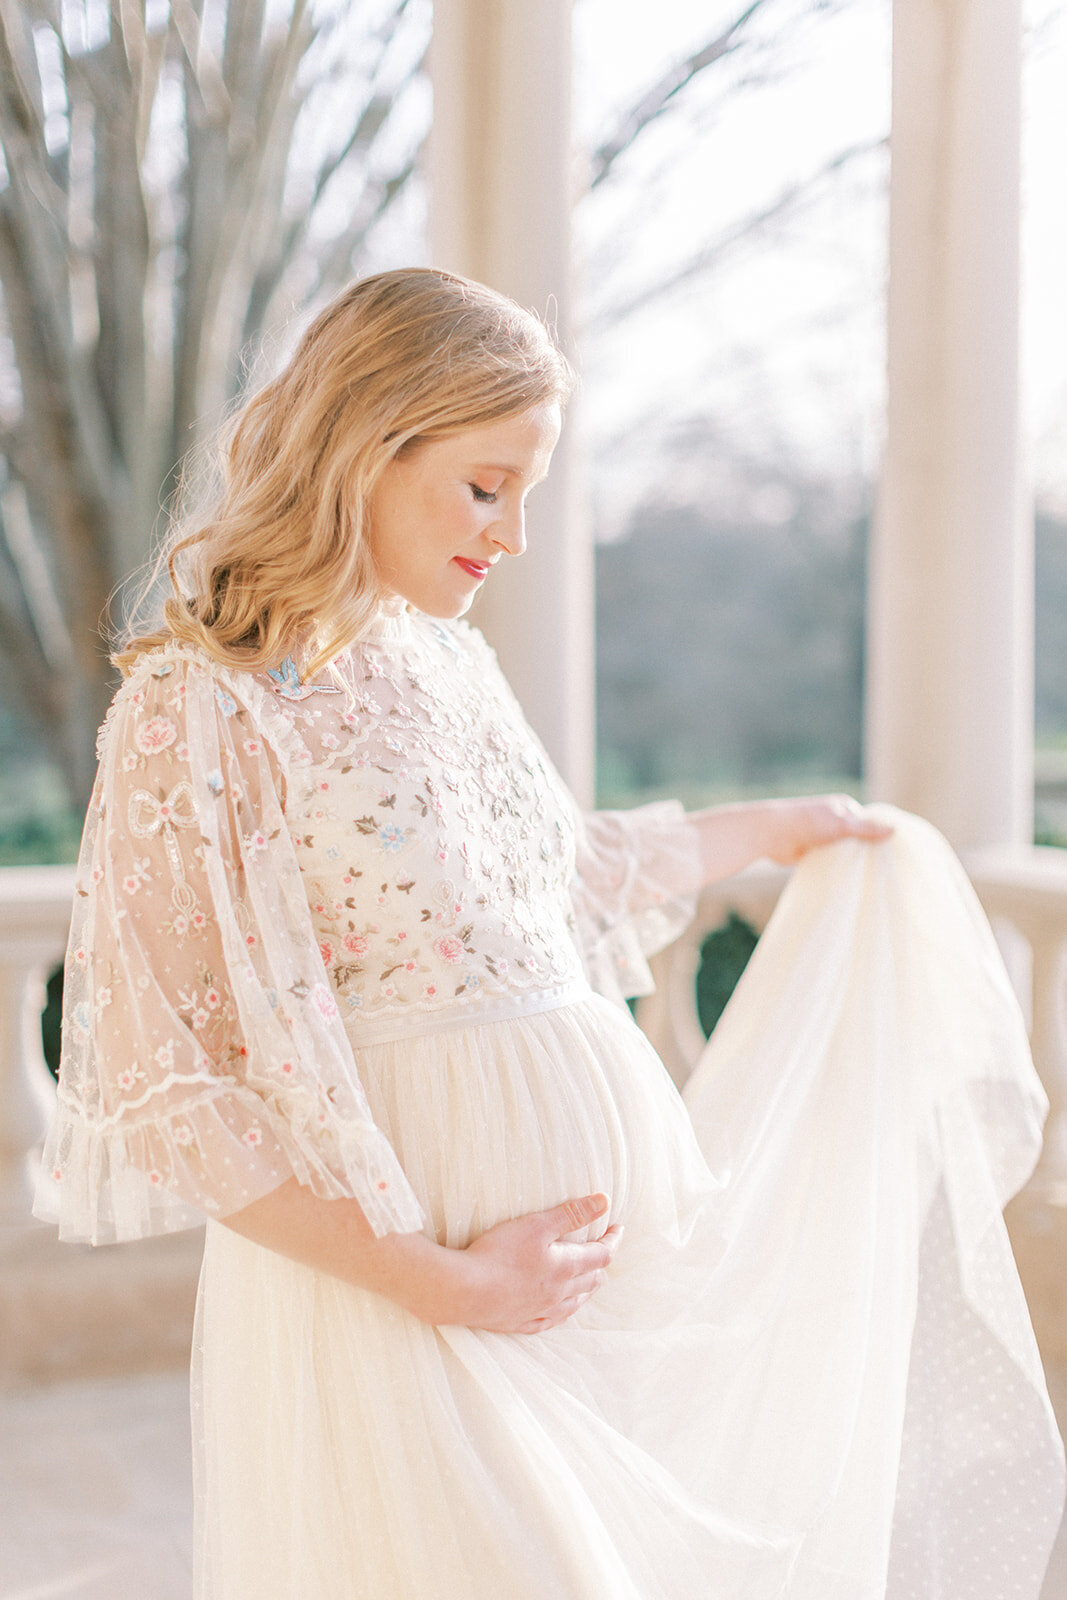 Pregnant blonde mother in Needle & Thread dress places on hand below her belly and the other hand holding up part of the dress.